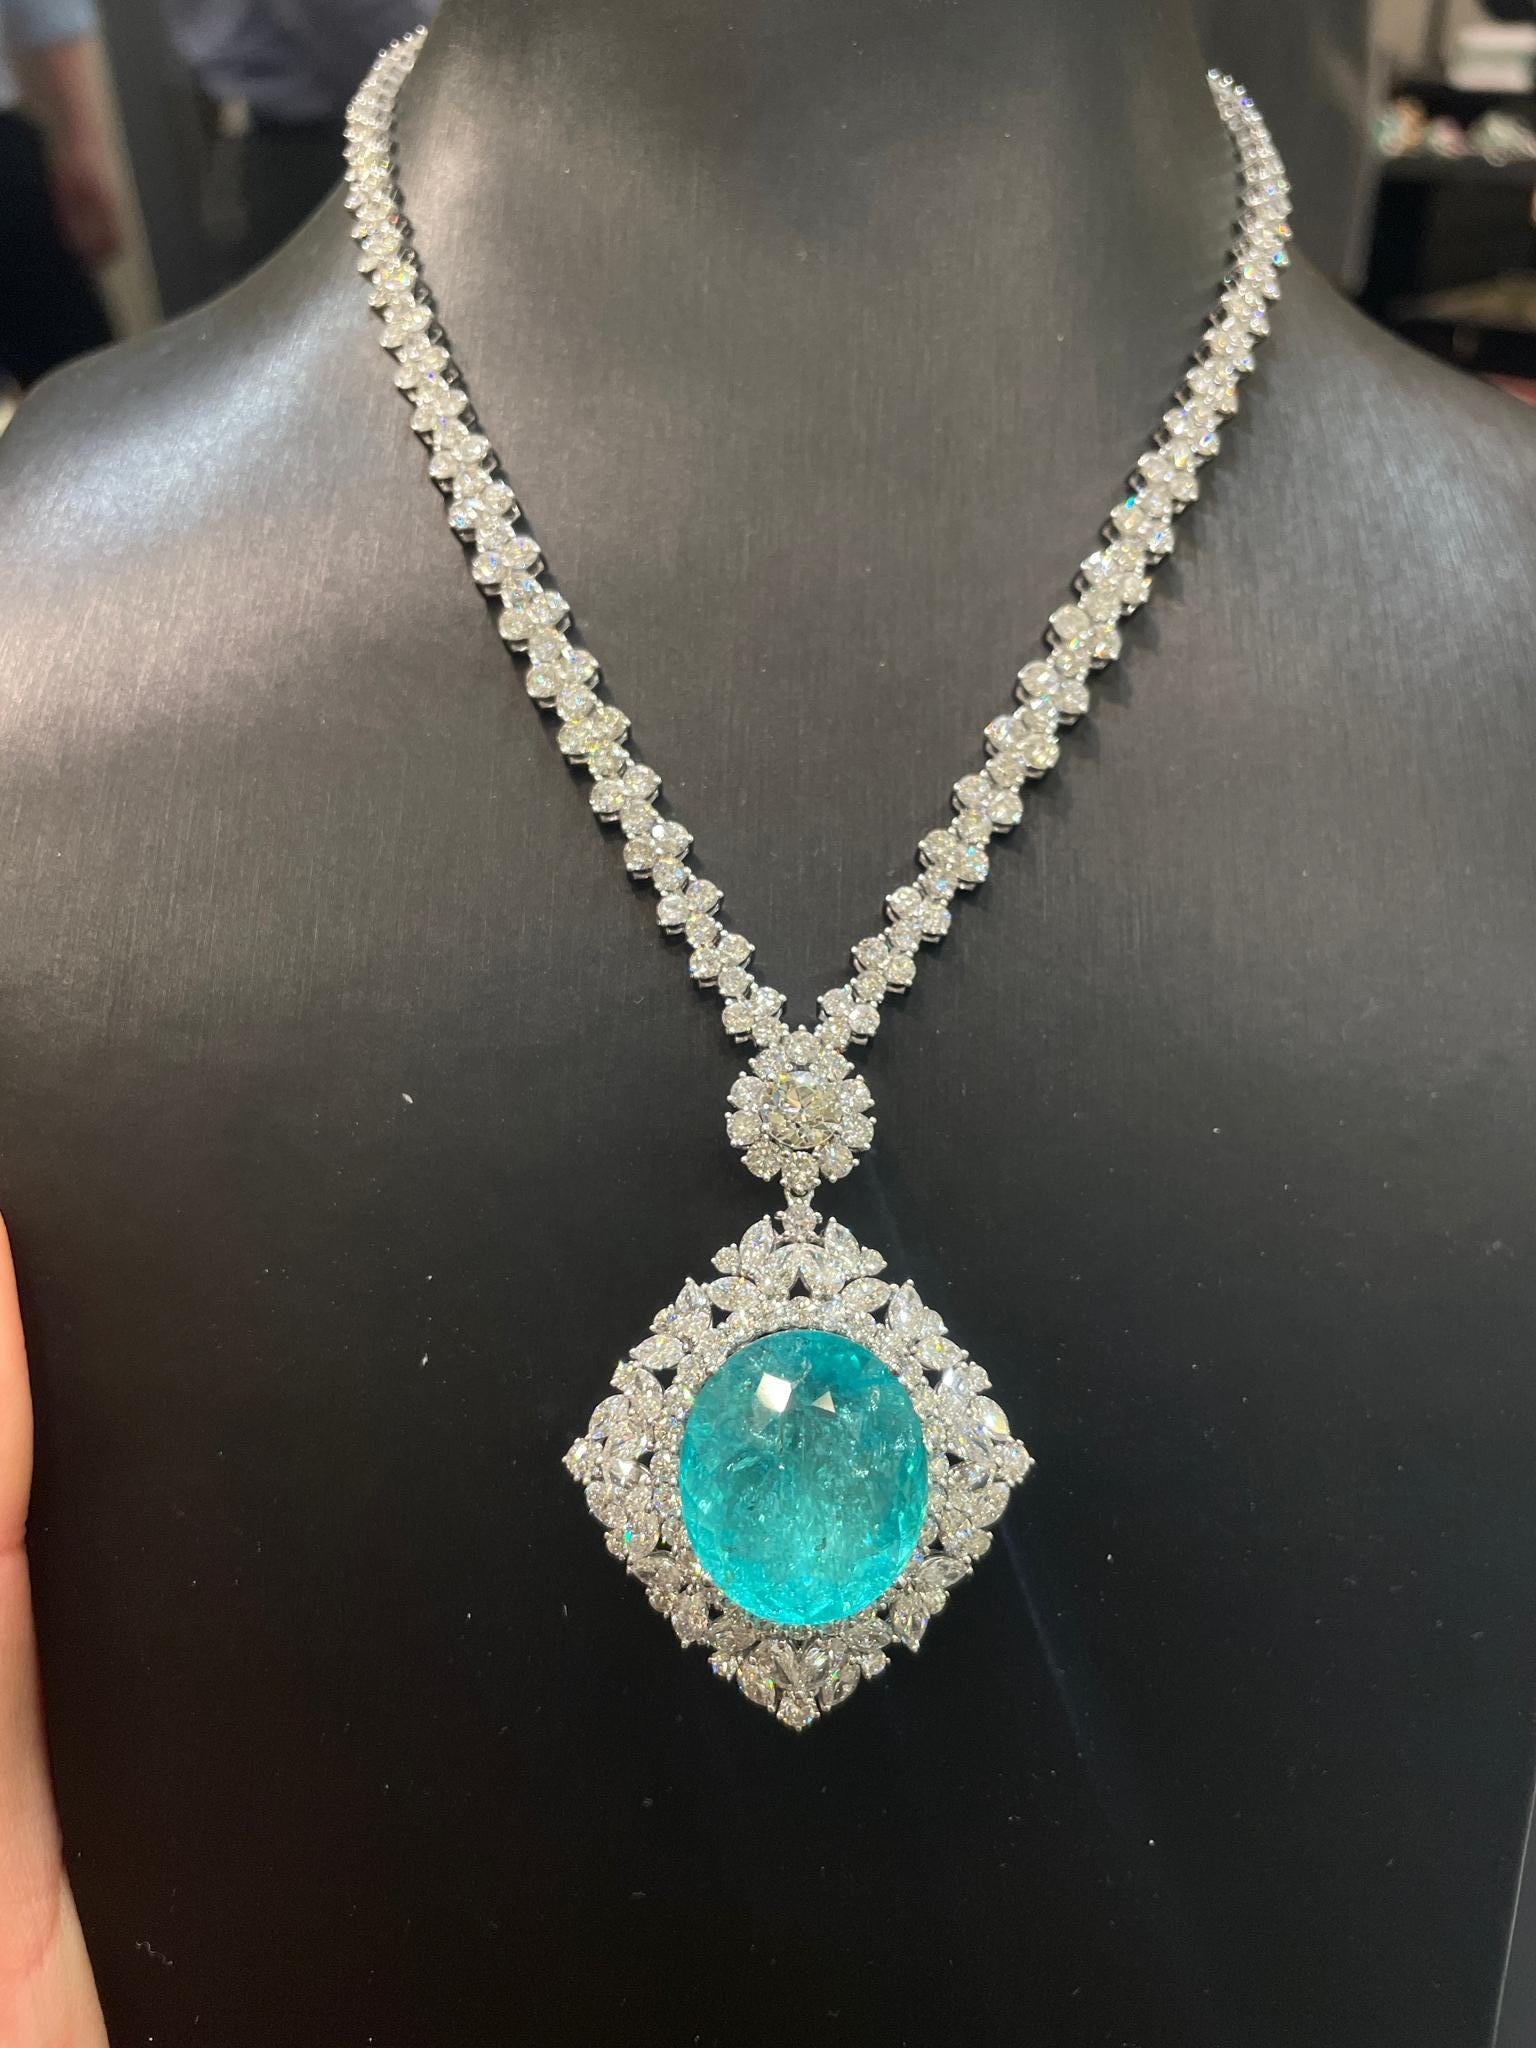 The Following Items we are offering is a Rare Important Gorgeous 18KT White Gold Glittering Diamond and Paraiba Tourmaline Necklace!!!! Necklace features Outstanding Multi Shaped Shimmering Gorgeous Extremely Rare Fancy Oval Cut Large Paraiba